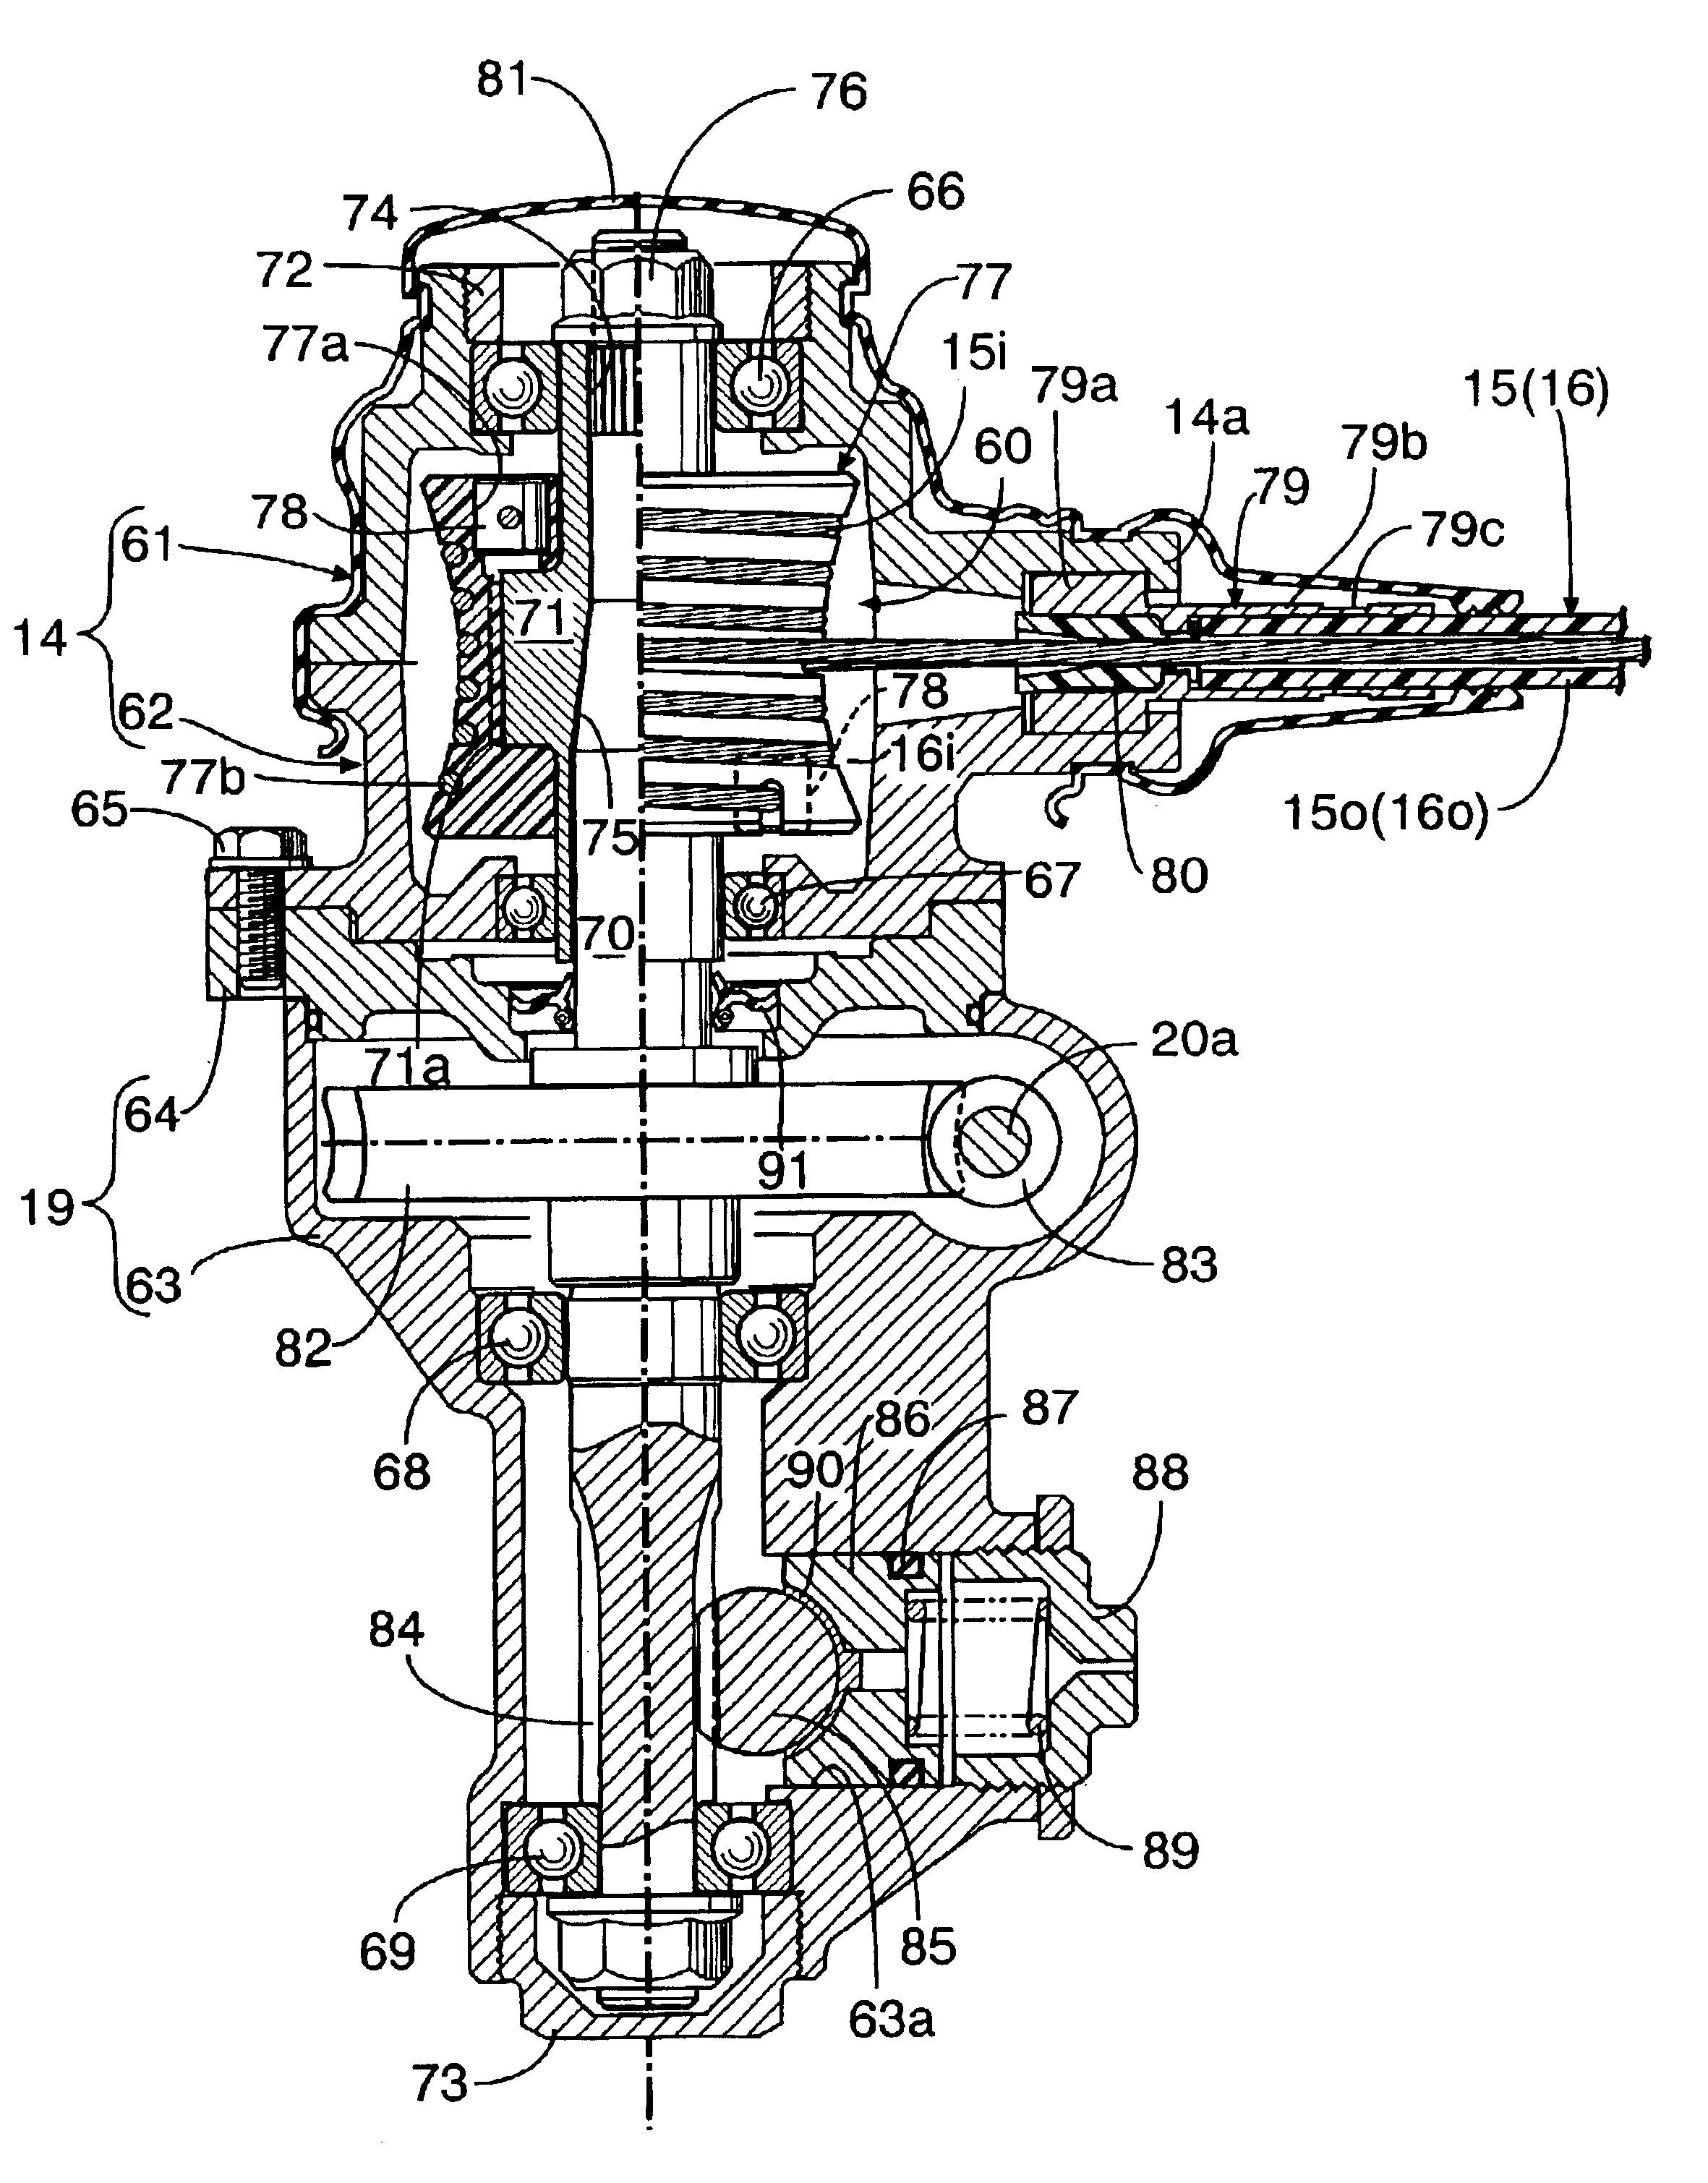 Cable-type steering device with variable steering gear ratio